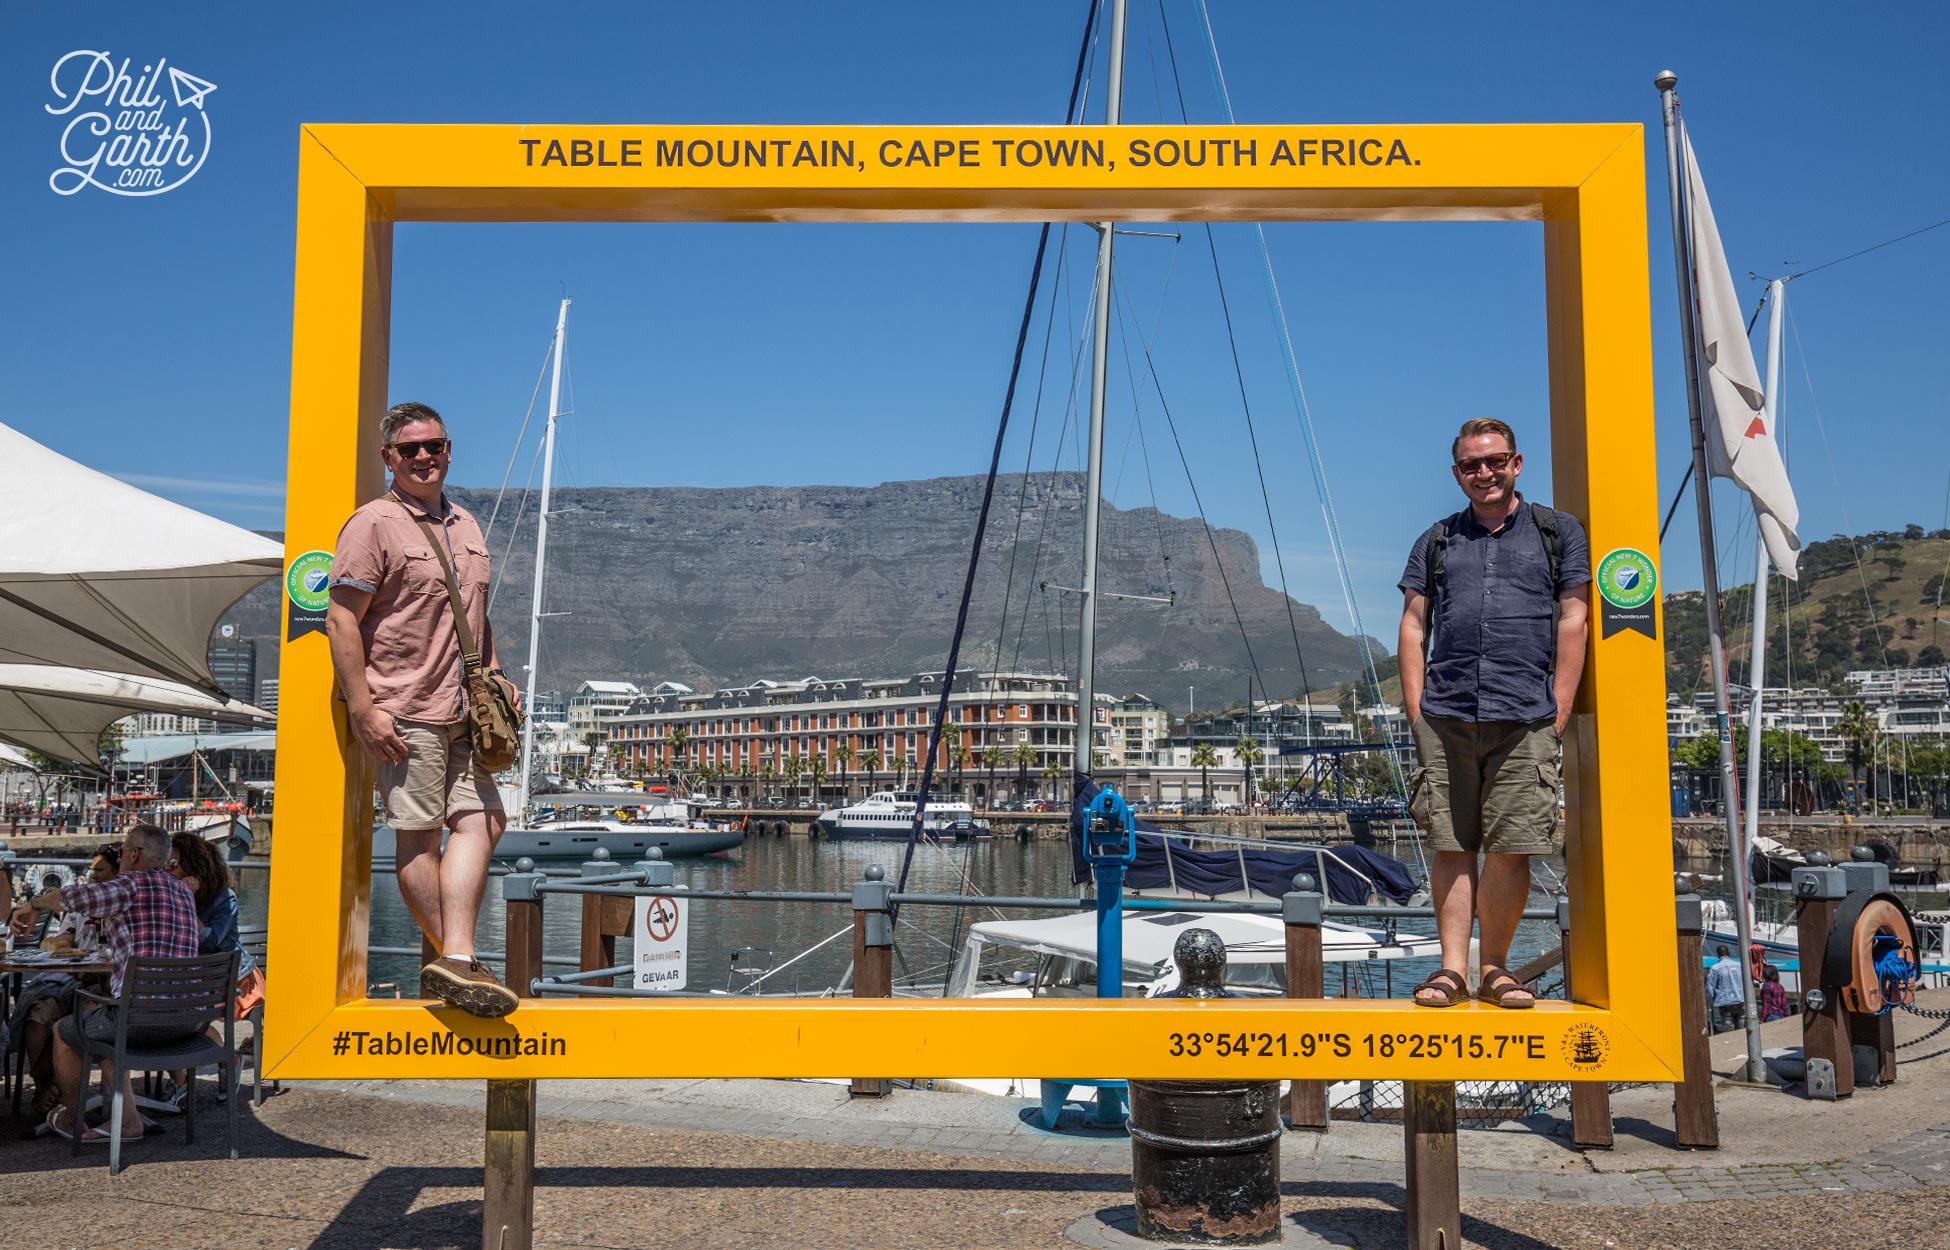 Phil and Garth in Cape Town